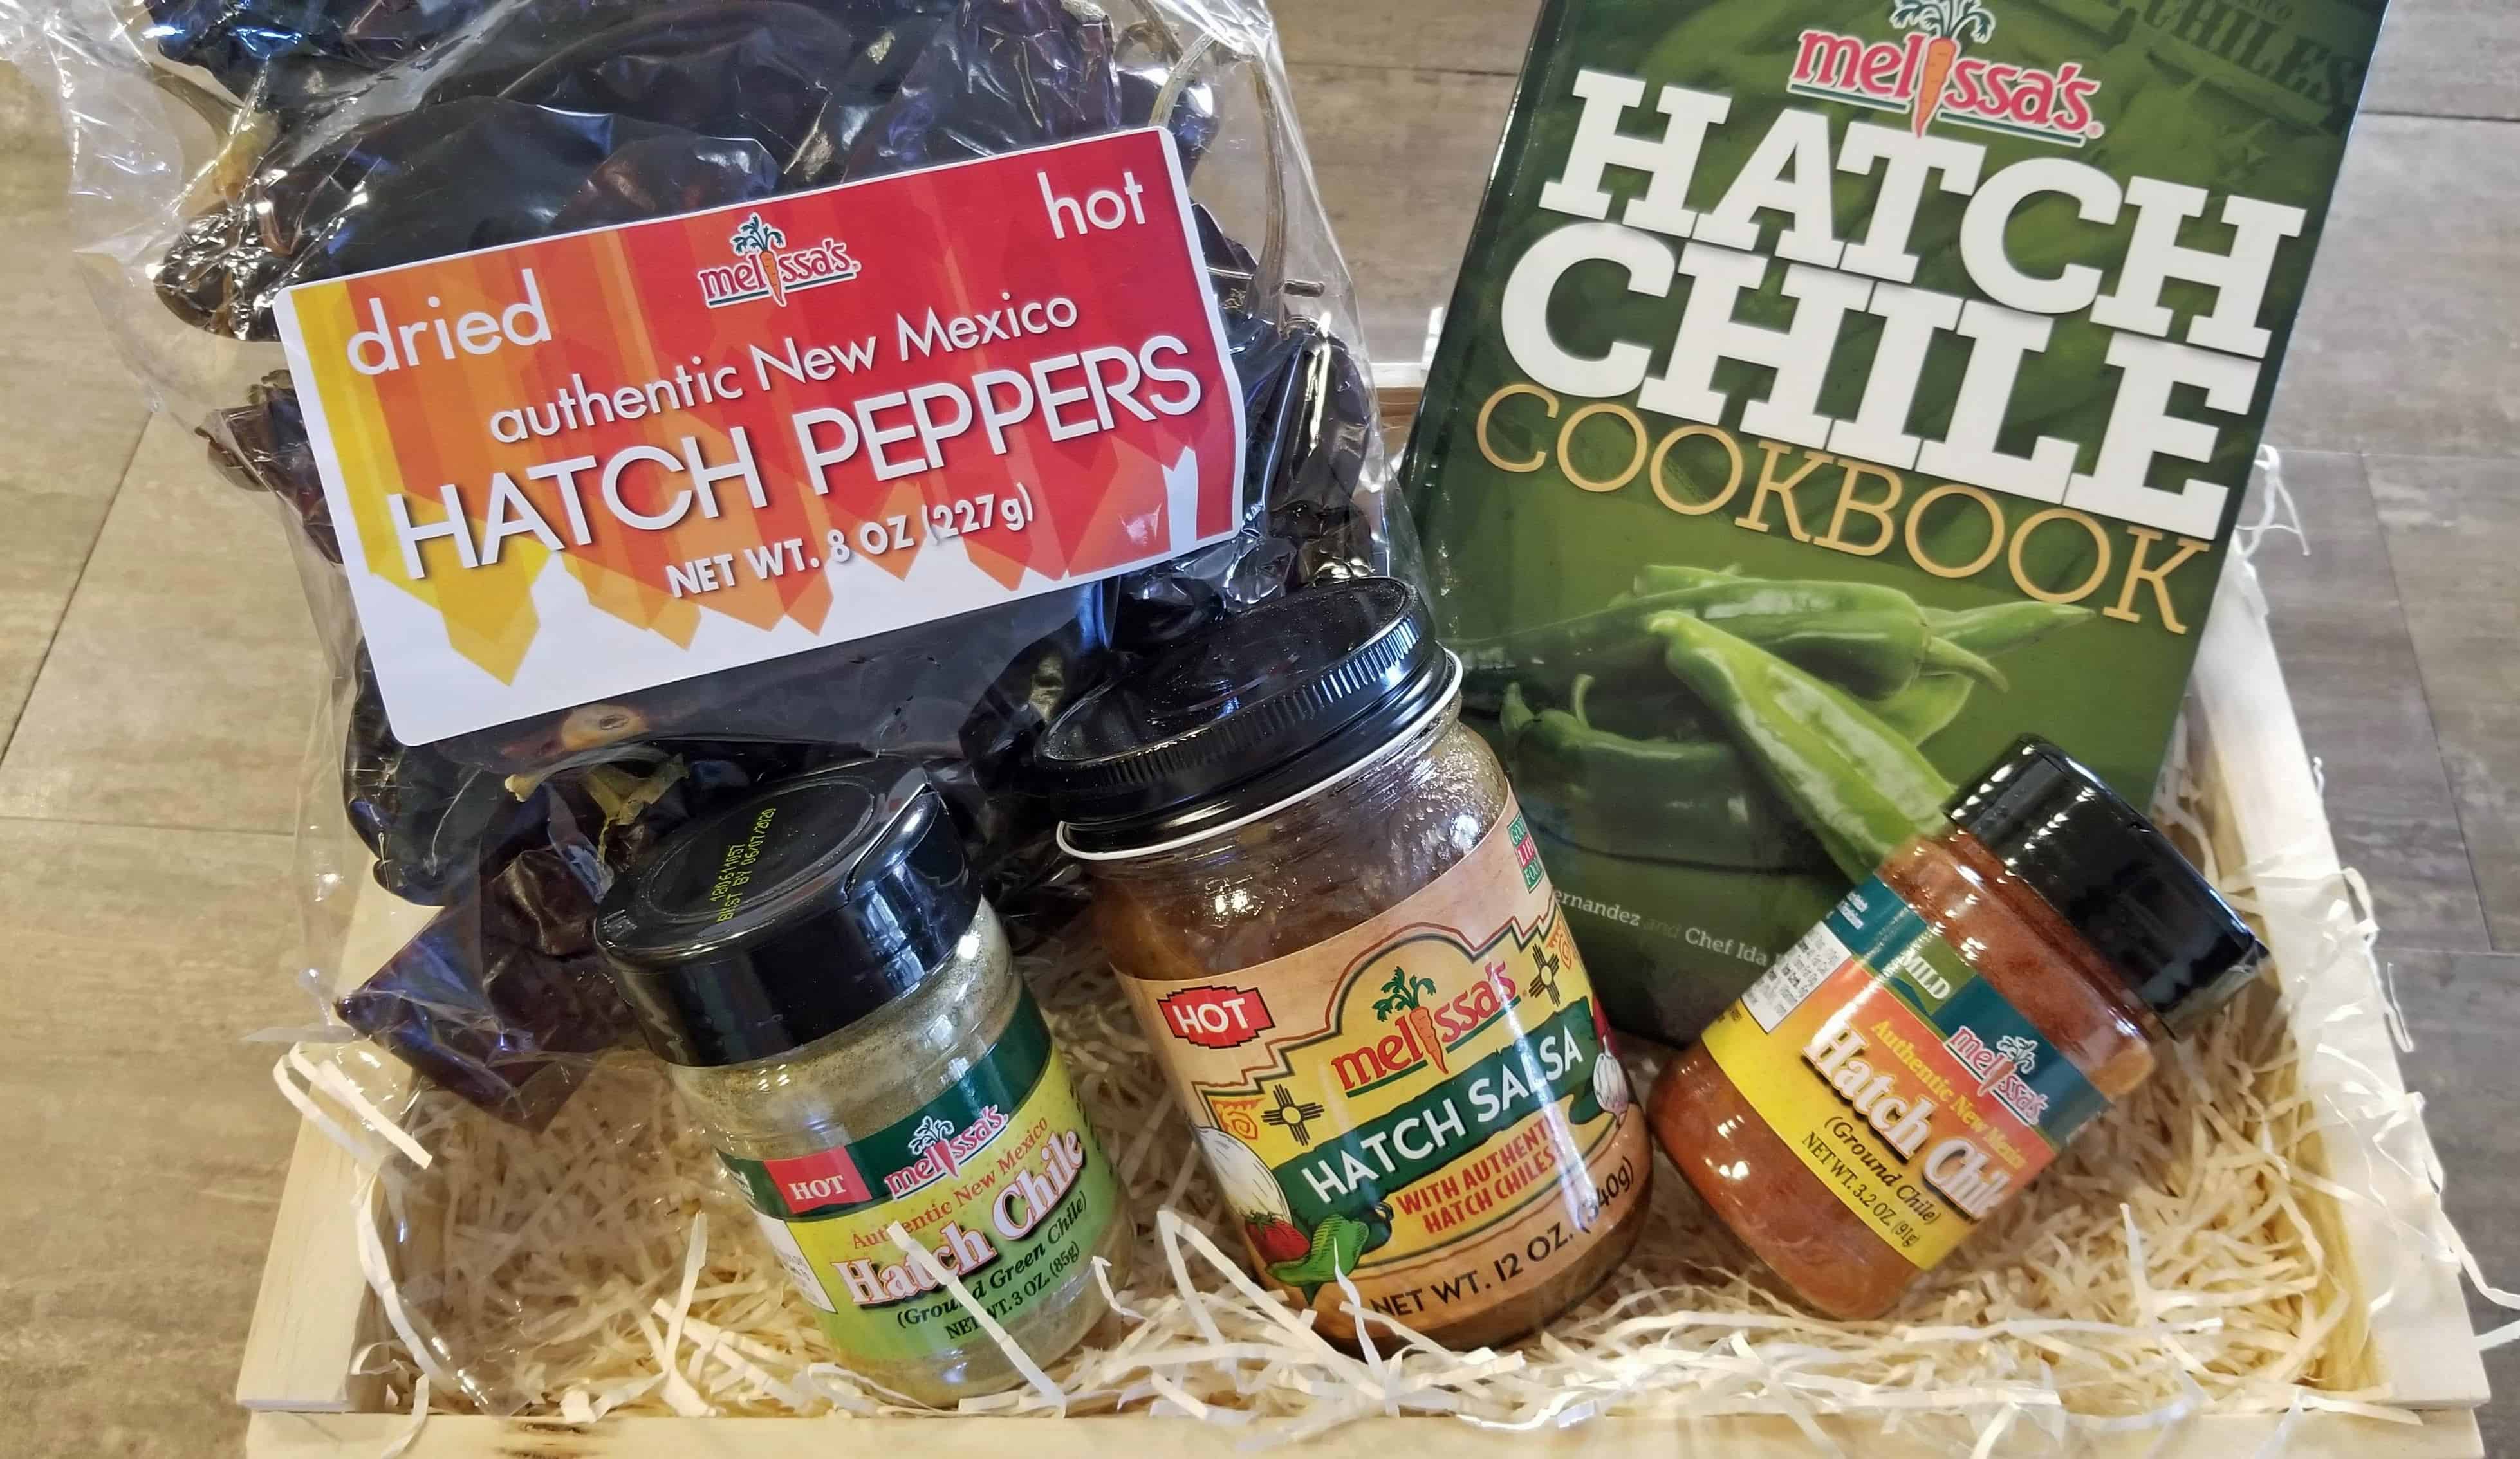 Shopping for Hatch Chile Recipes at Smart & Final